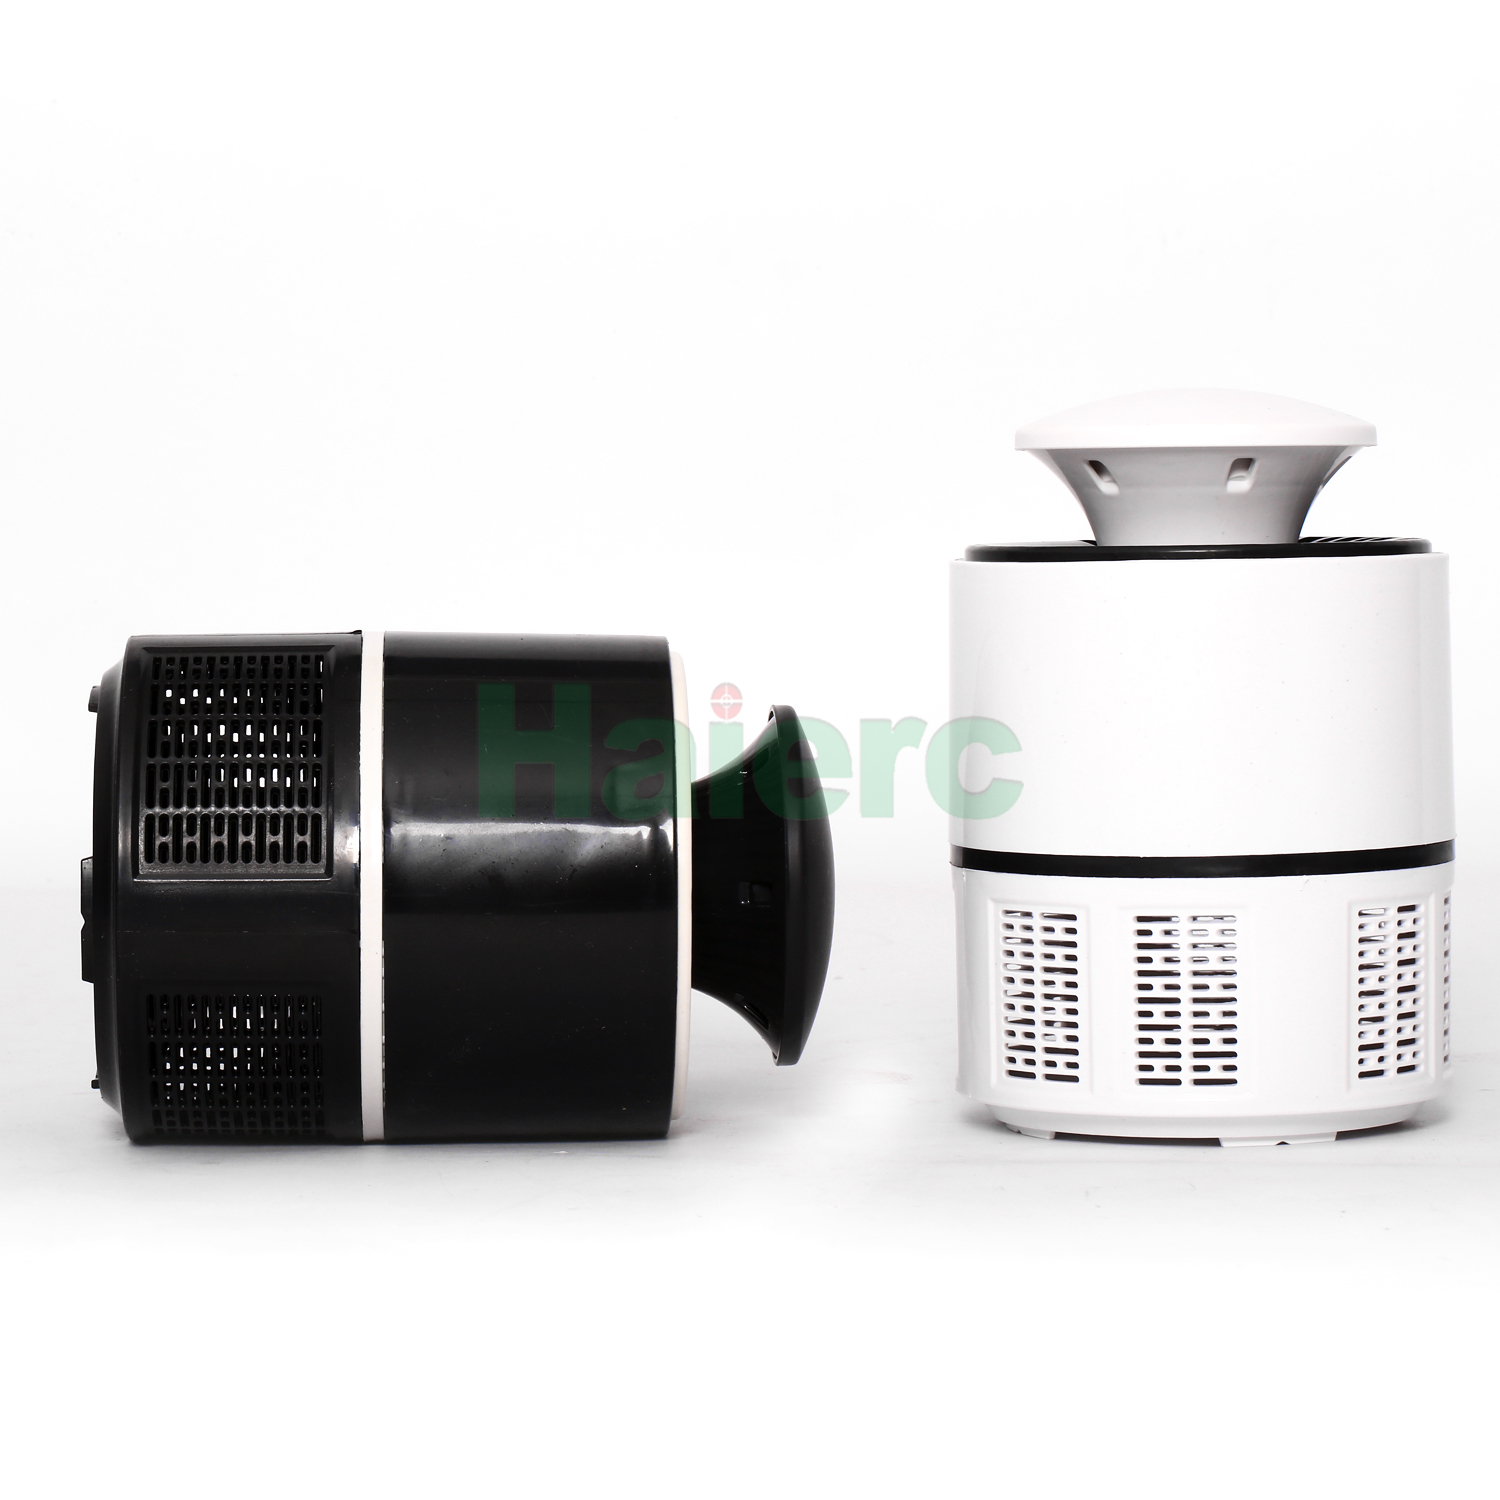 Haierc Pest Control LED Light Insect Mosquito Repellent Mosquito Killer Lamp